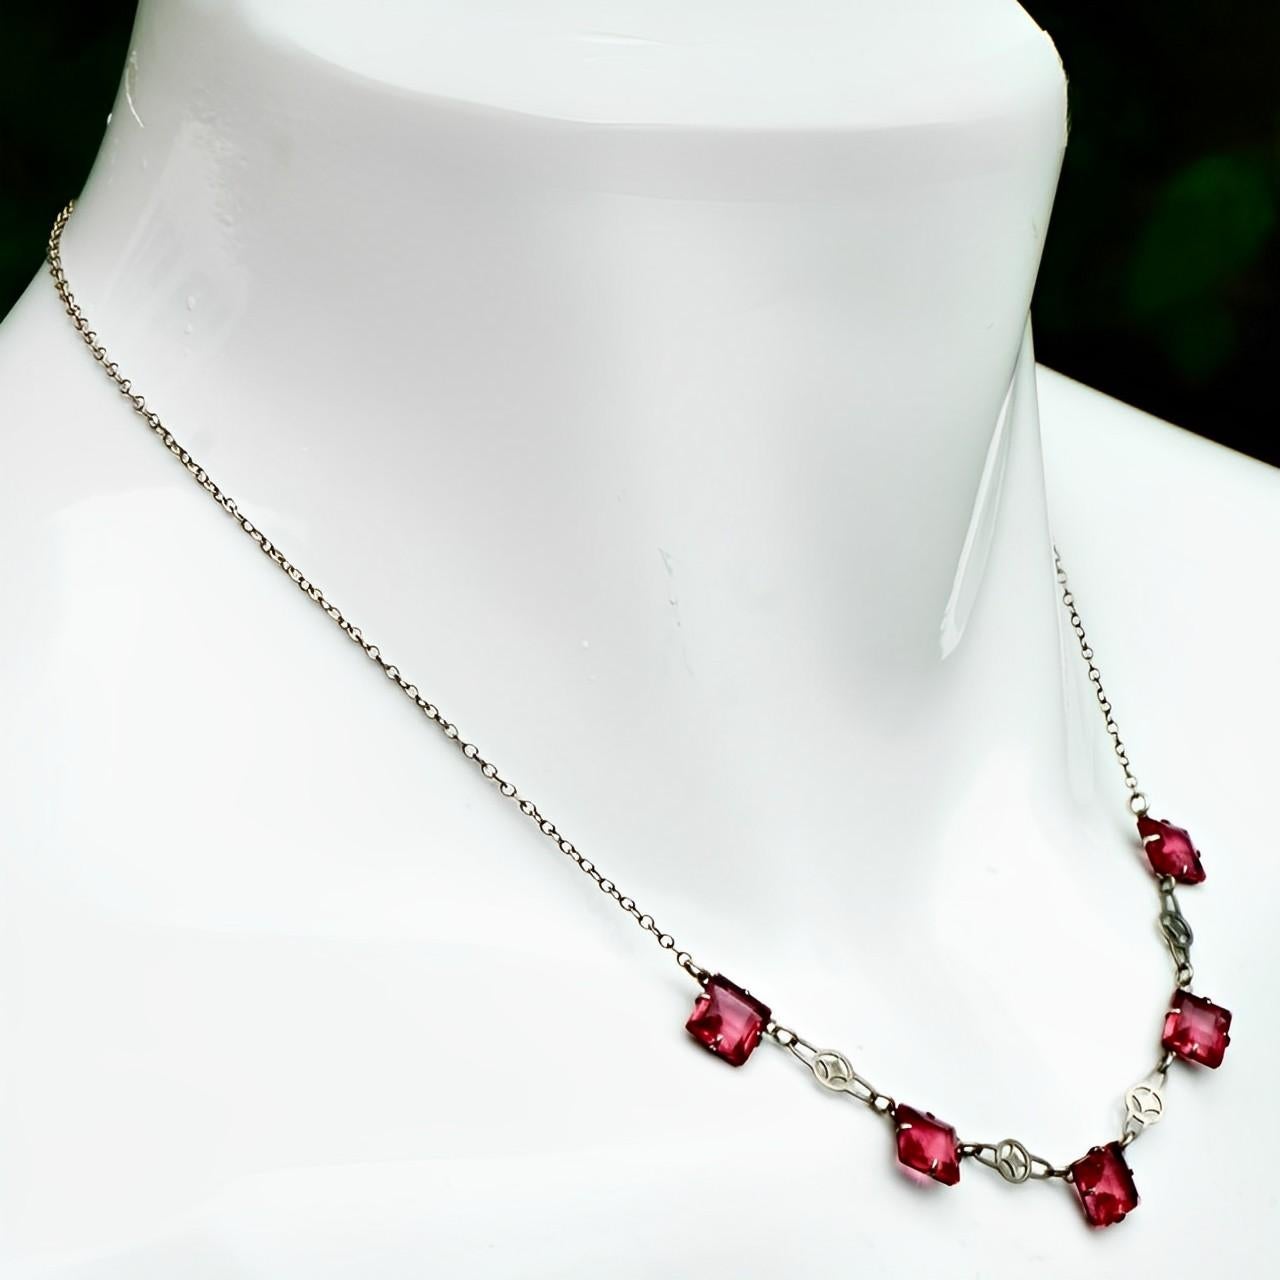 Art Deco Silver Tone Chain Necklace with Square Rouge Pink Glass Crystals In Good Condition For Sale In London, GB